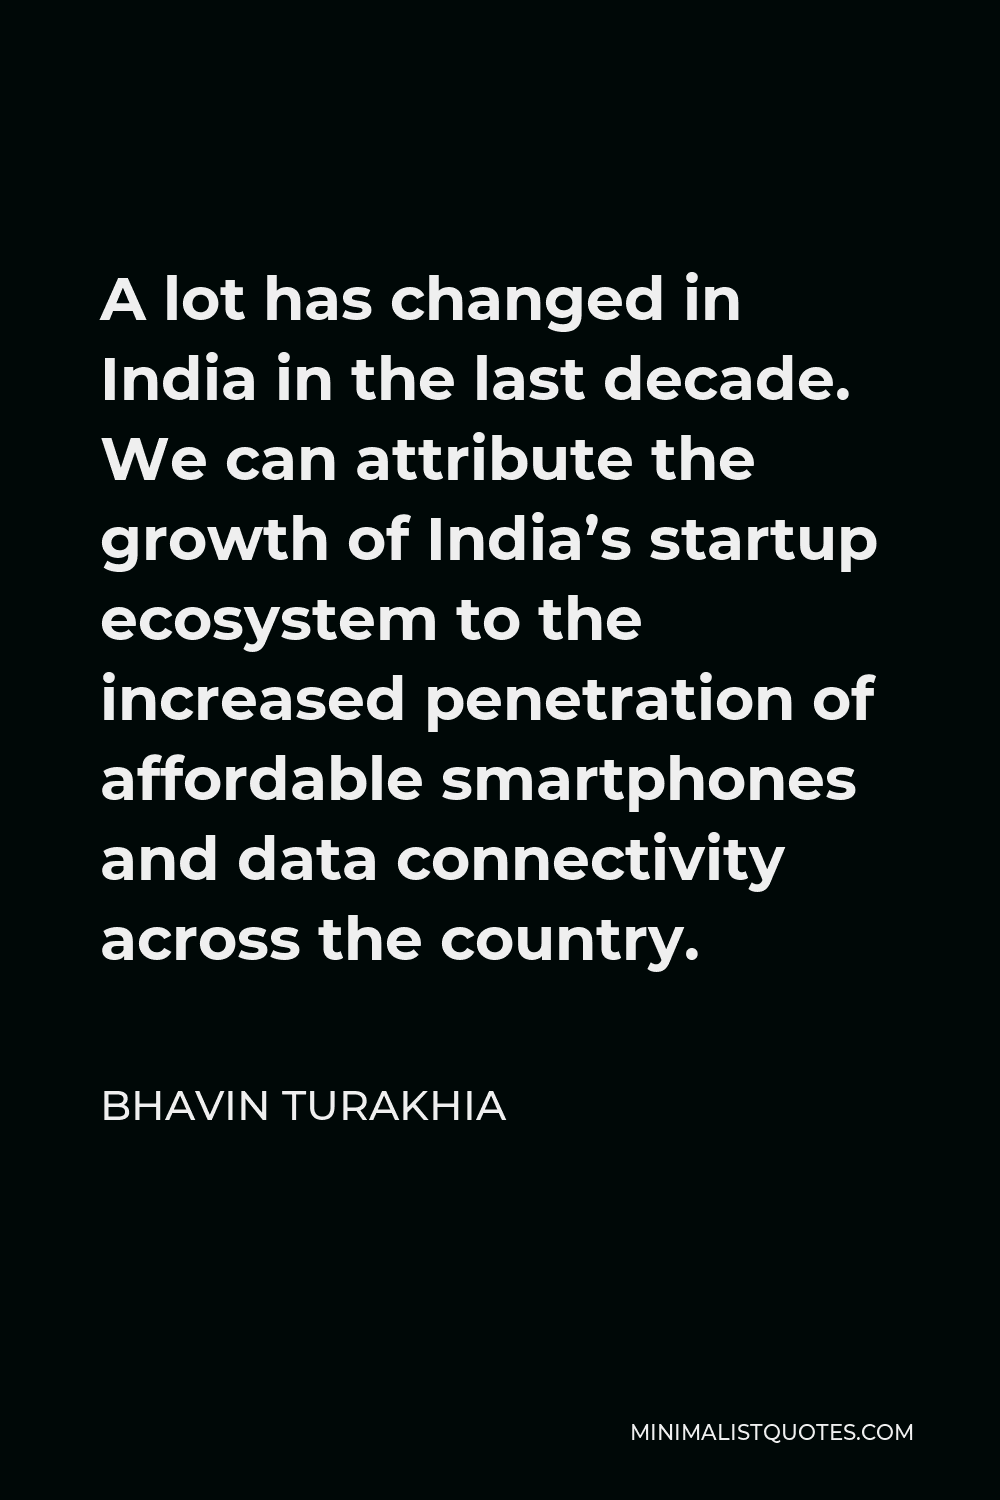 Bhavin Turakhia Quote - A lot has changed in India in the last decade. We can attribute the growth of India’s startup ecosystem to the increased penetration of affordable smartphones and data connectivity across the country.